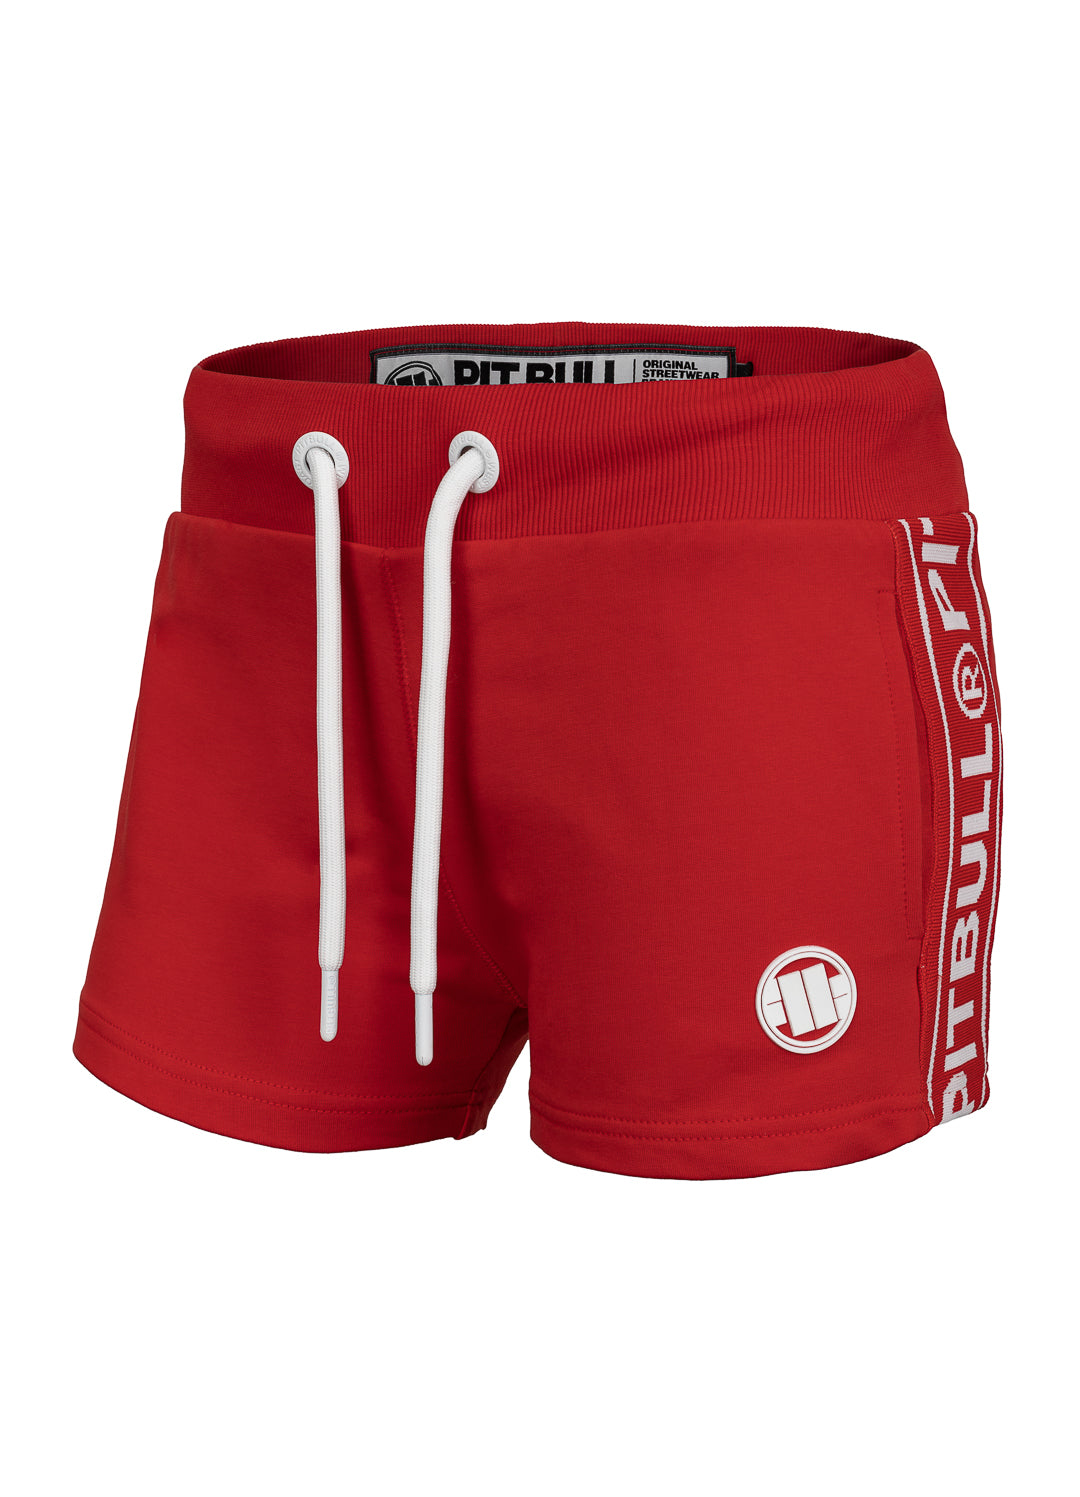 GLORIA French Terry Red Shorts.